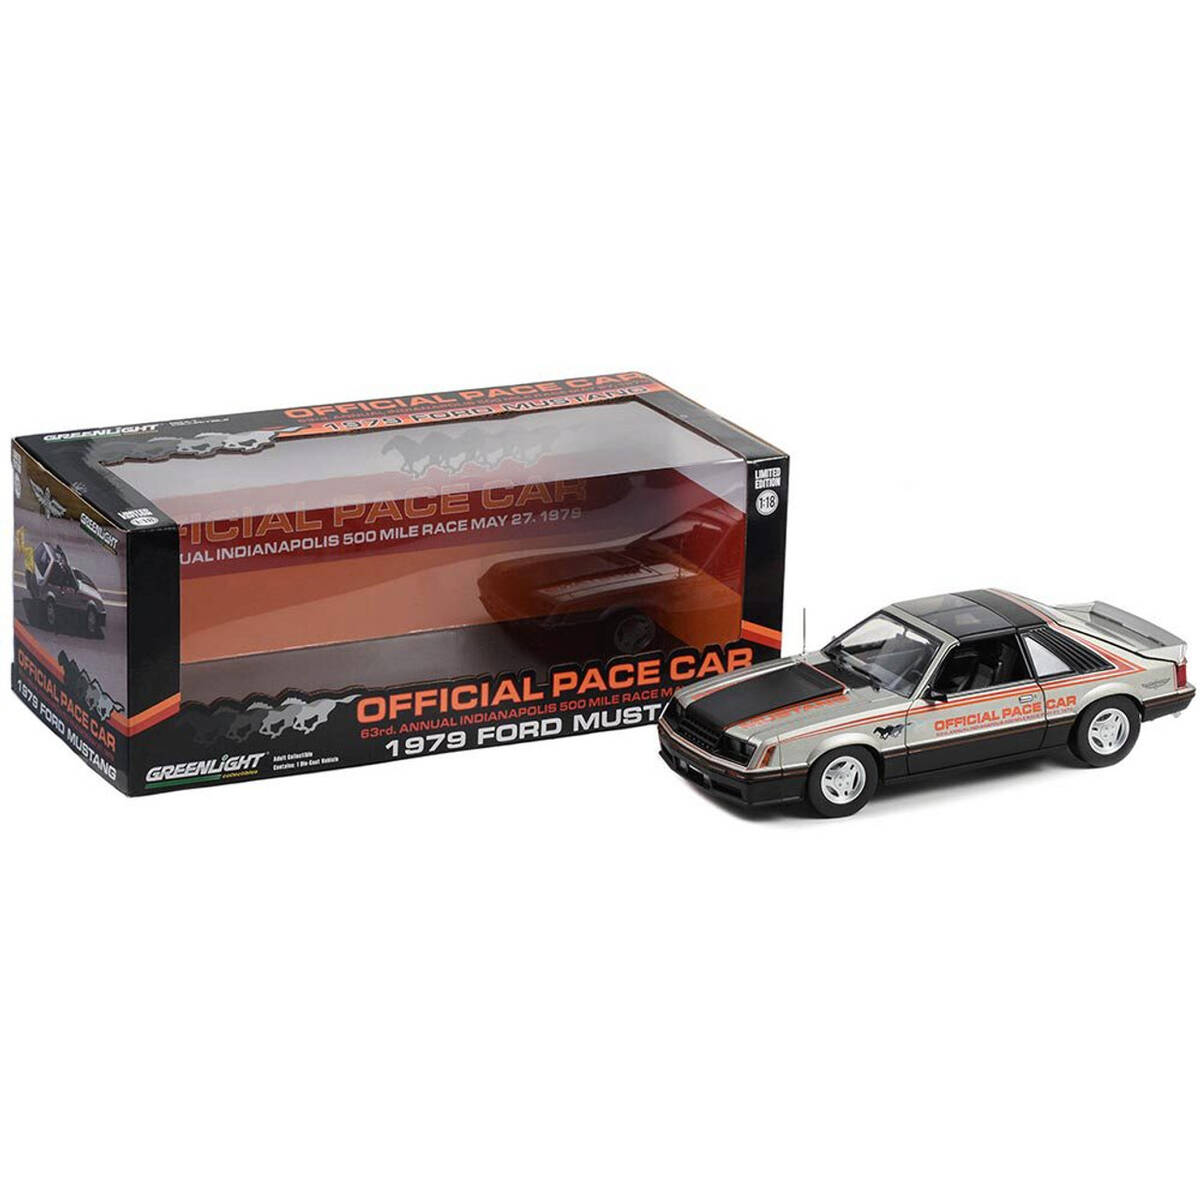 Greenlight 1/18 1979 Ford Mustang - 63rd Annual Indianapolis 500 Mile Race Official Pace Car 13599